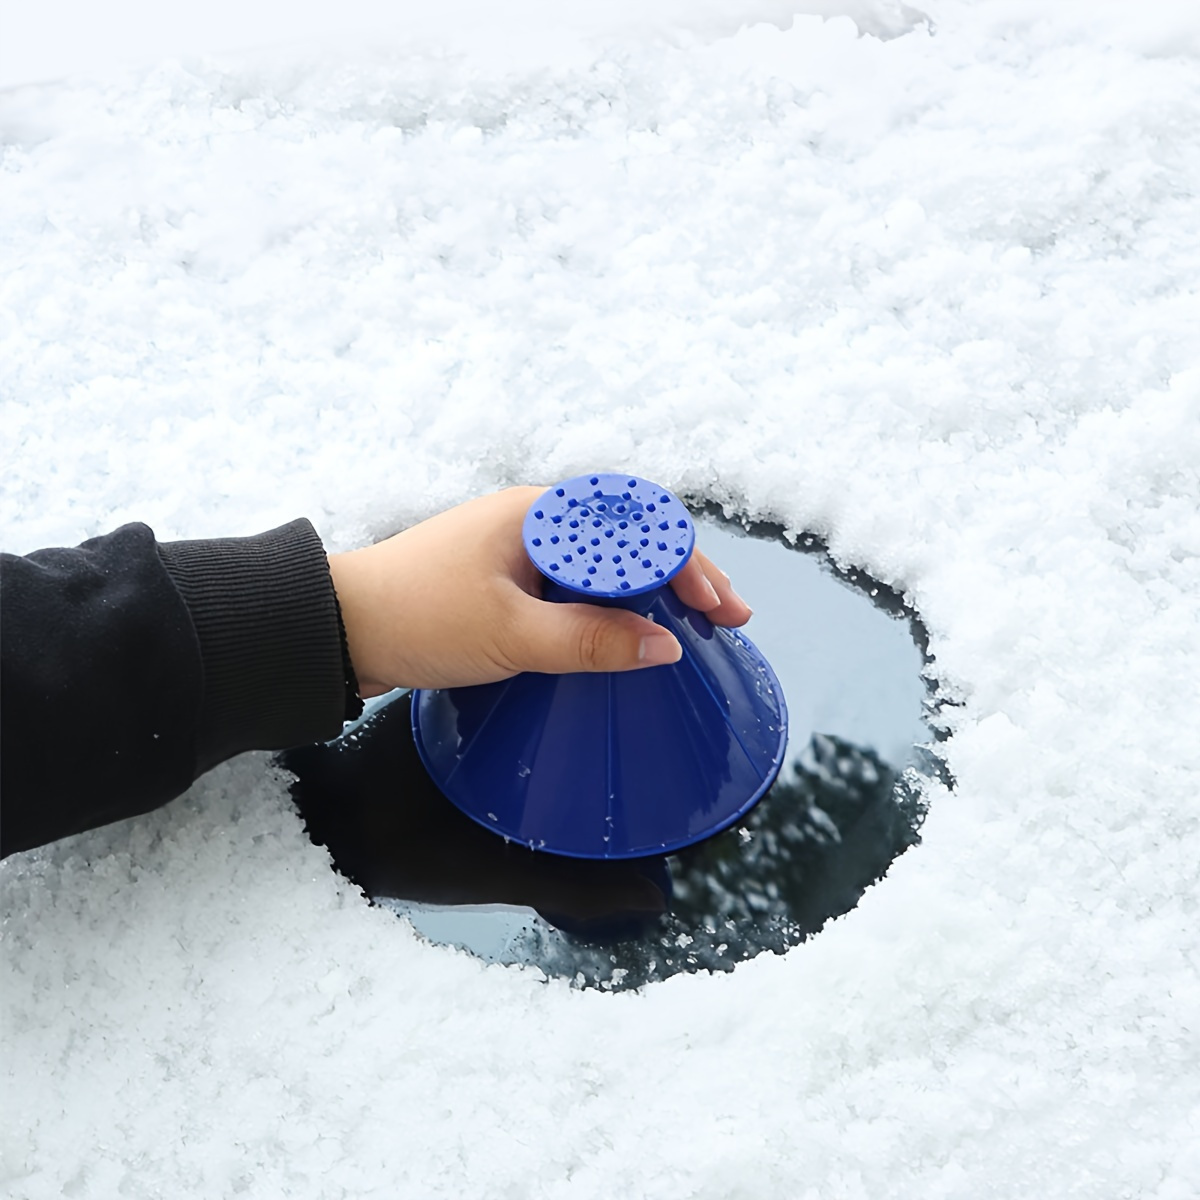 The Best Snow Removal Tools for Your Car